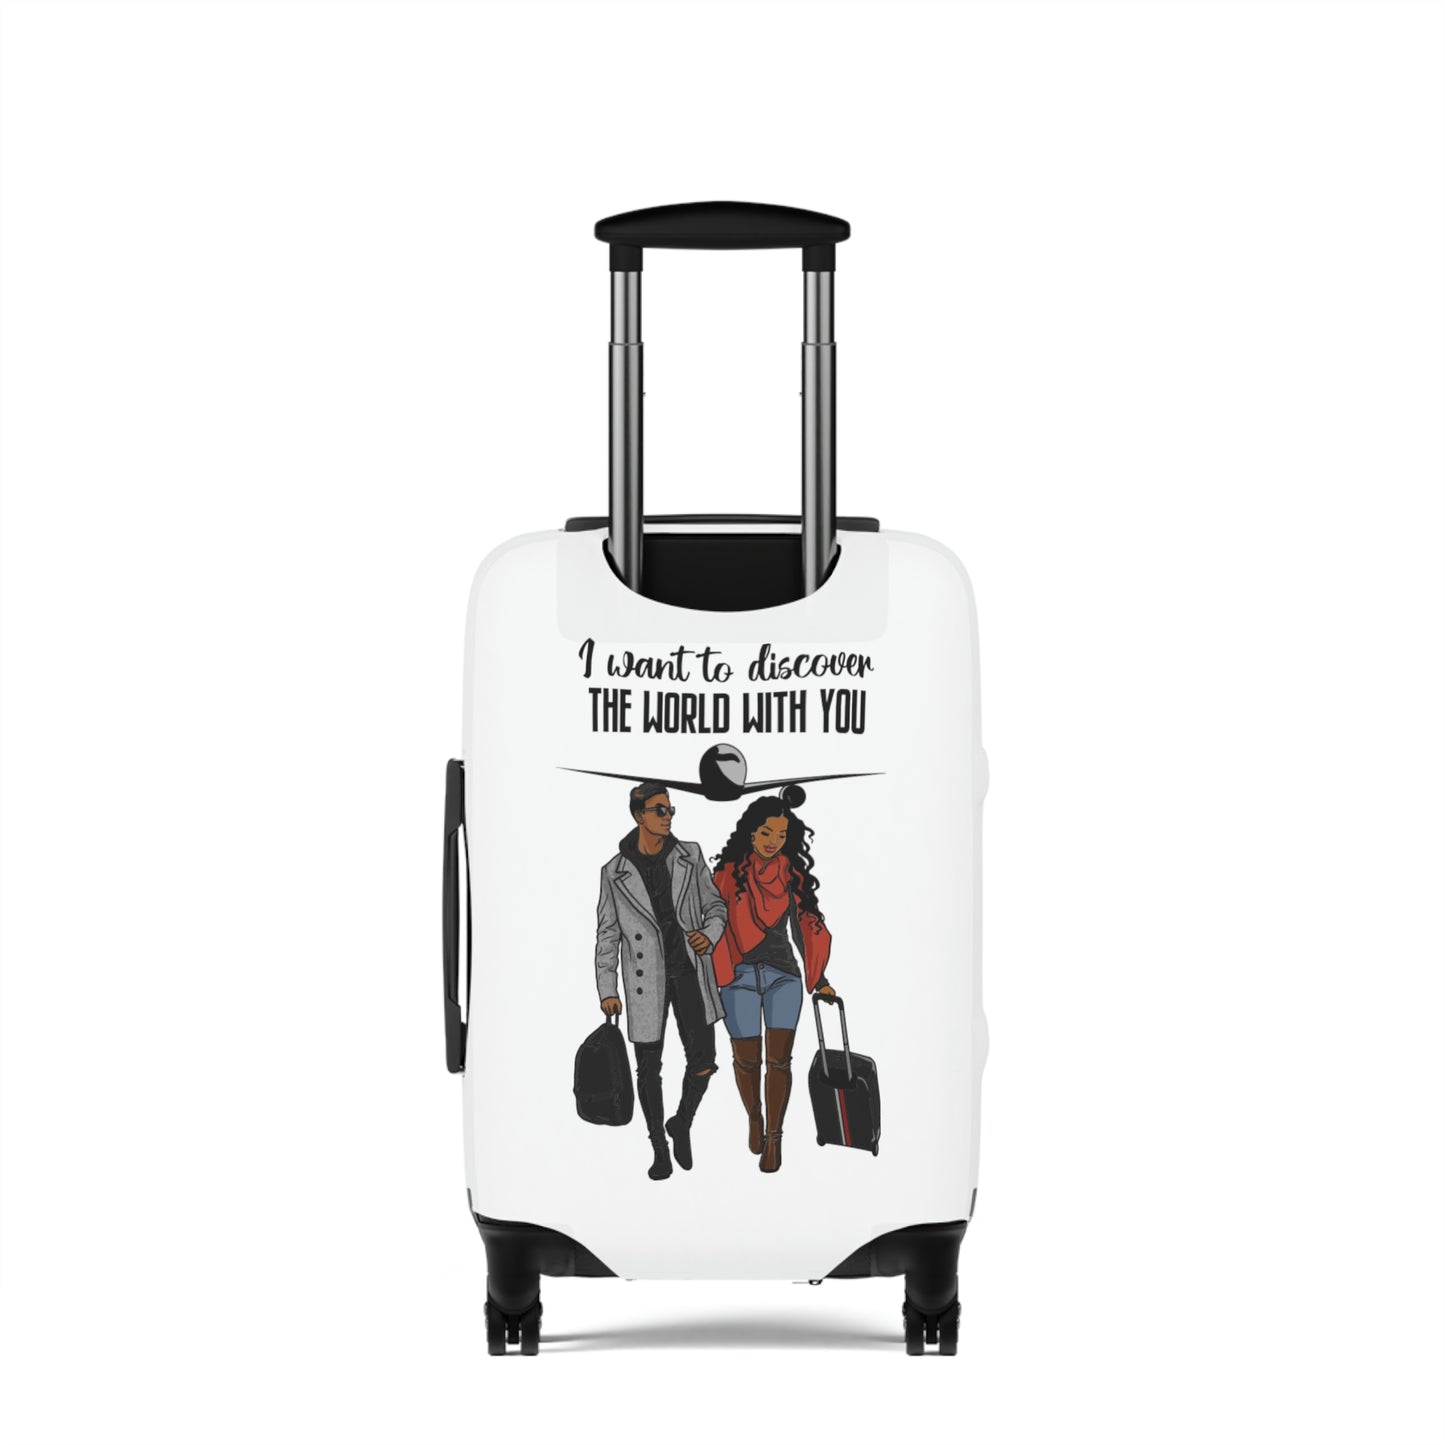 Luggage Cover